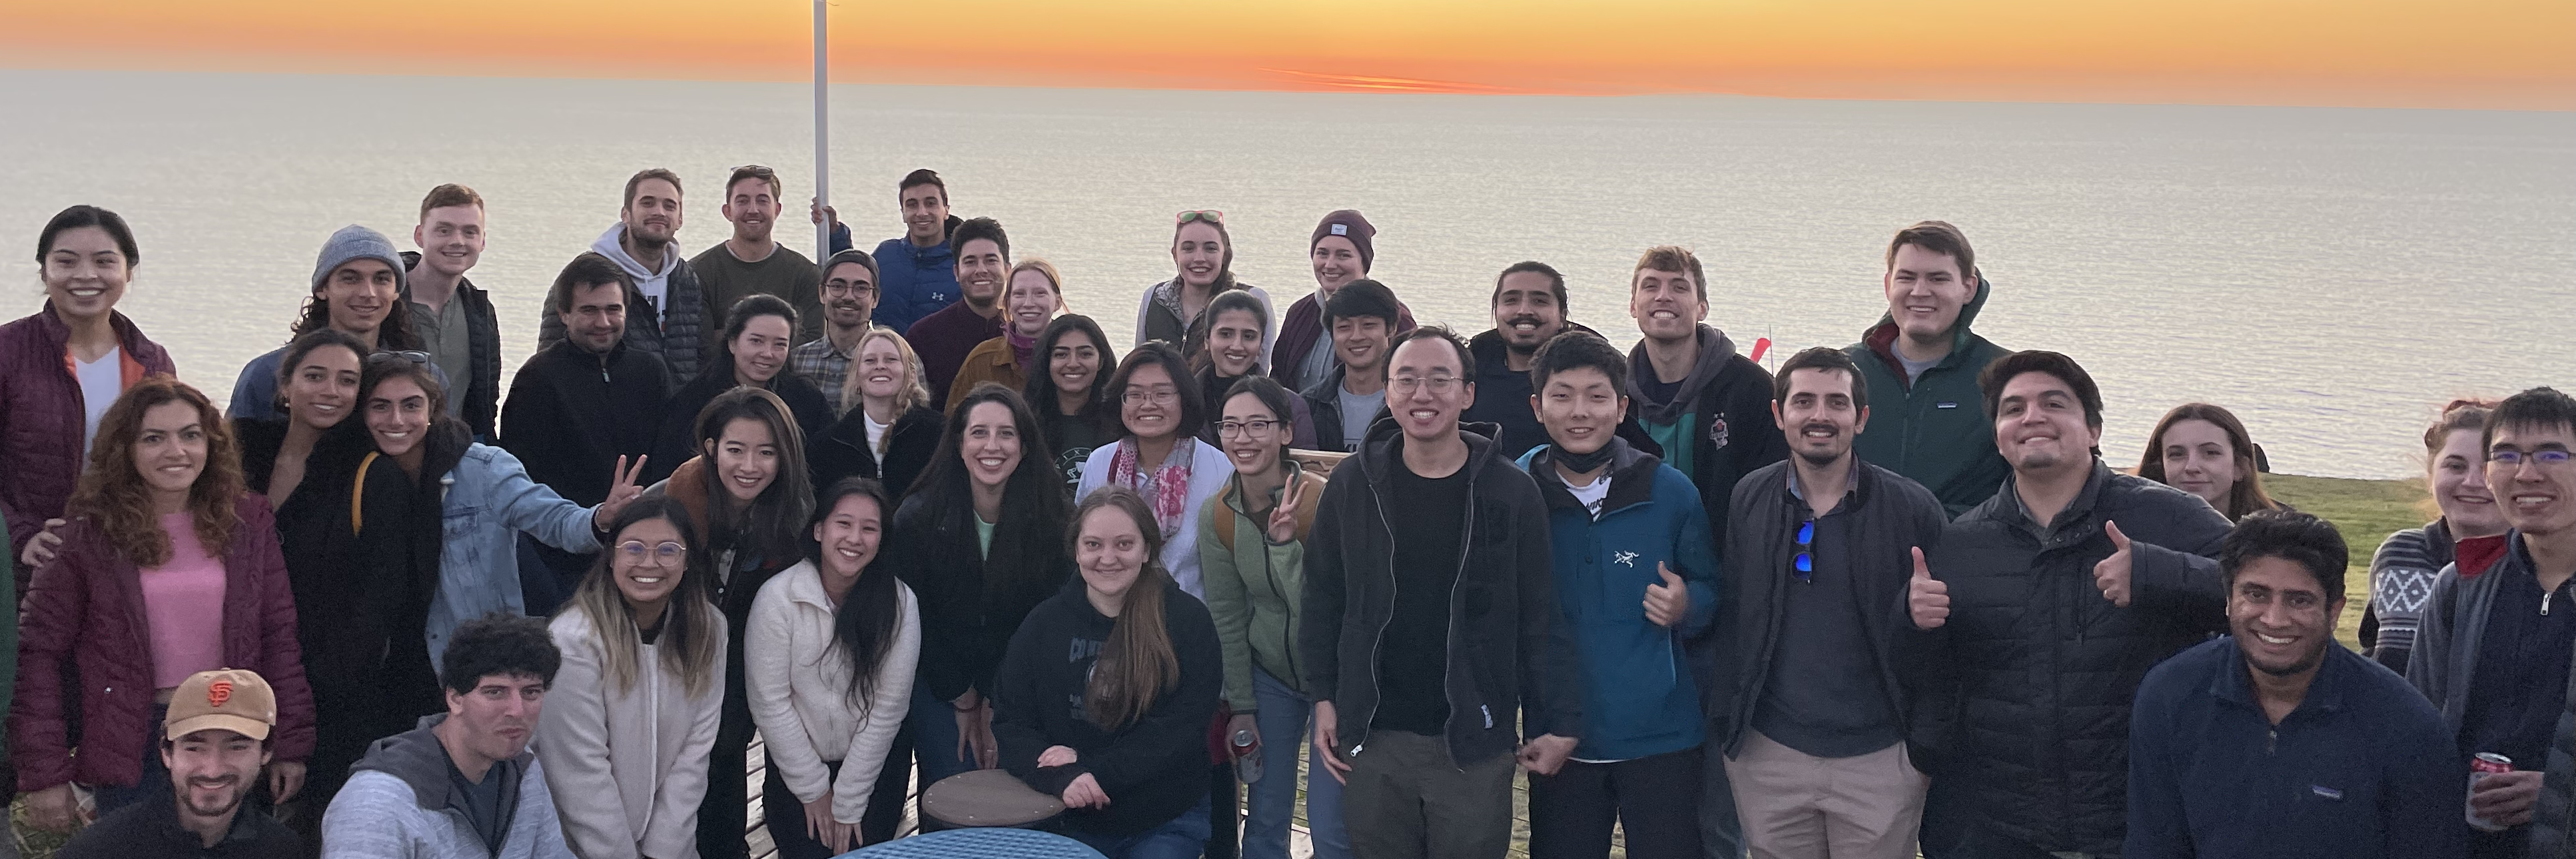 Group photo of students at the Torrey Pines Gliderport